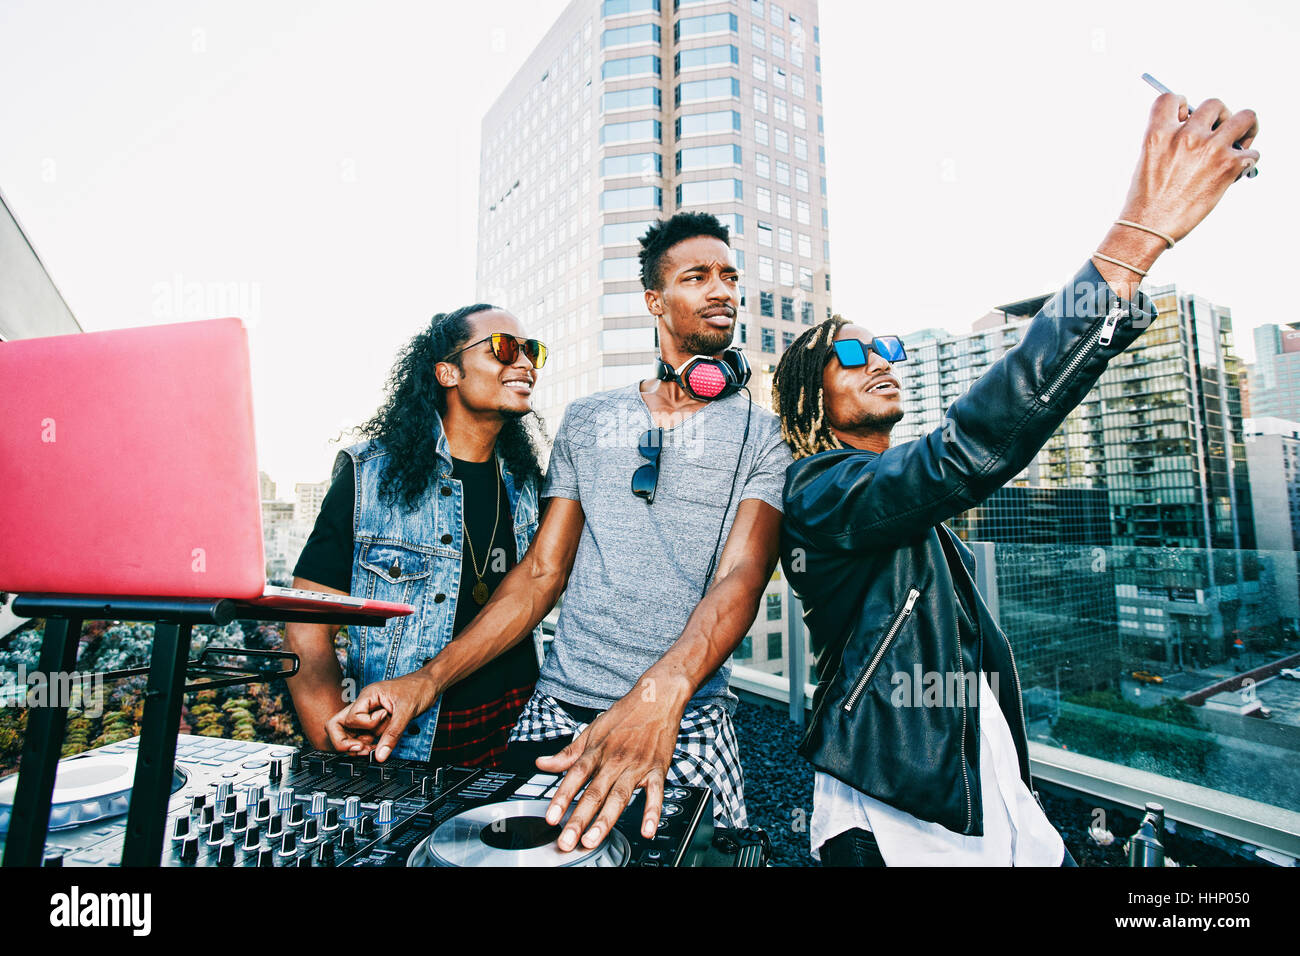 Men posing for cell phone selfie with DJ on urban rooftop Stock Photo